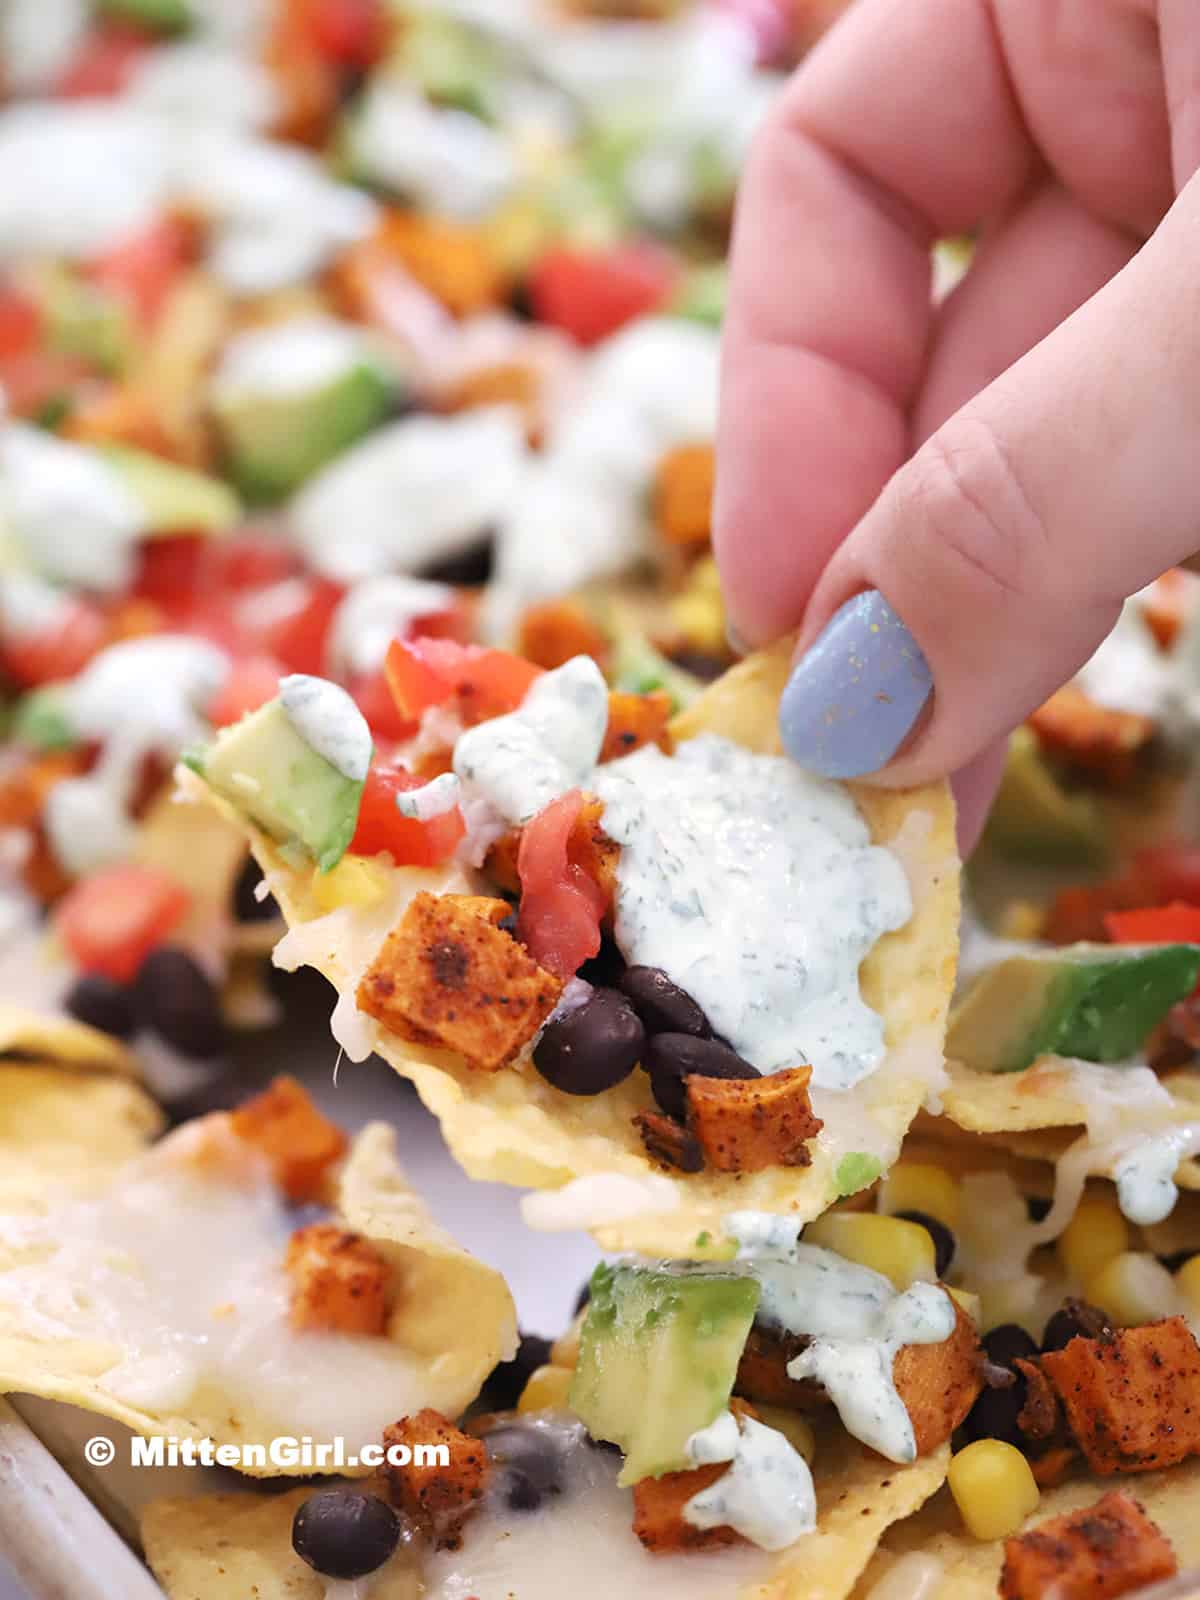 A hand picking up a chip from a tray of vegetarian nachos.